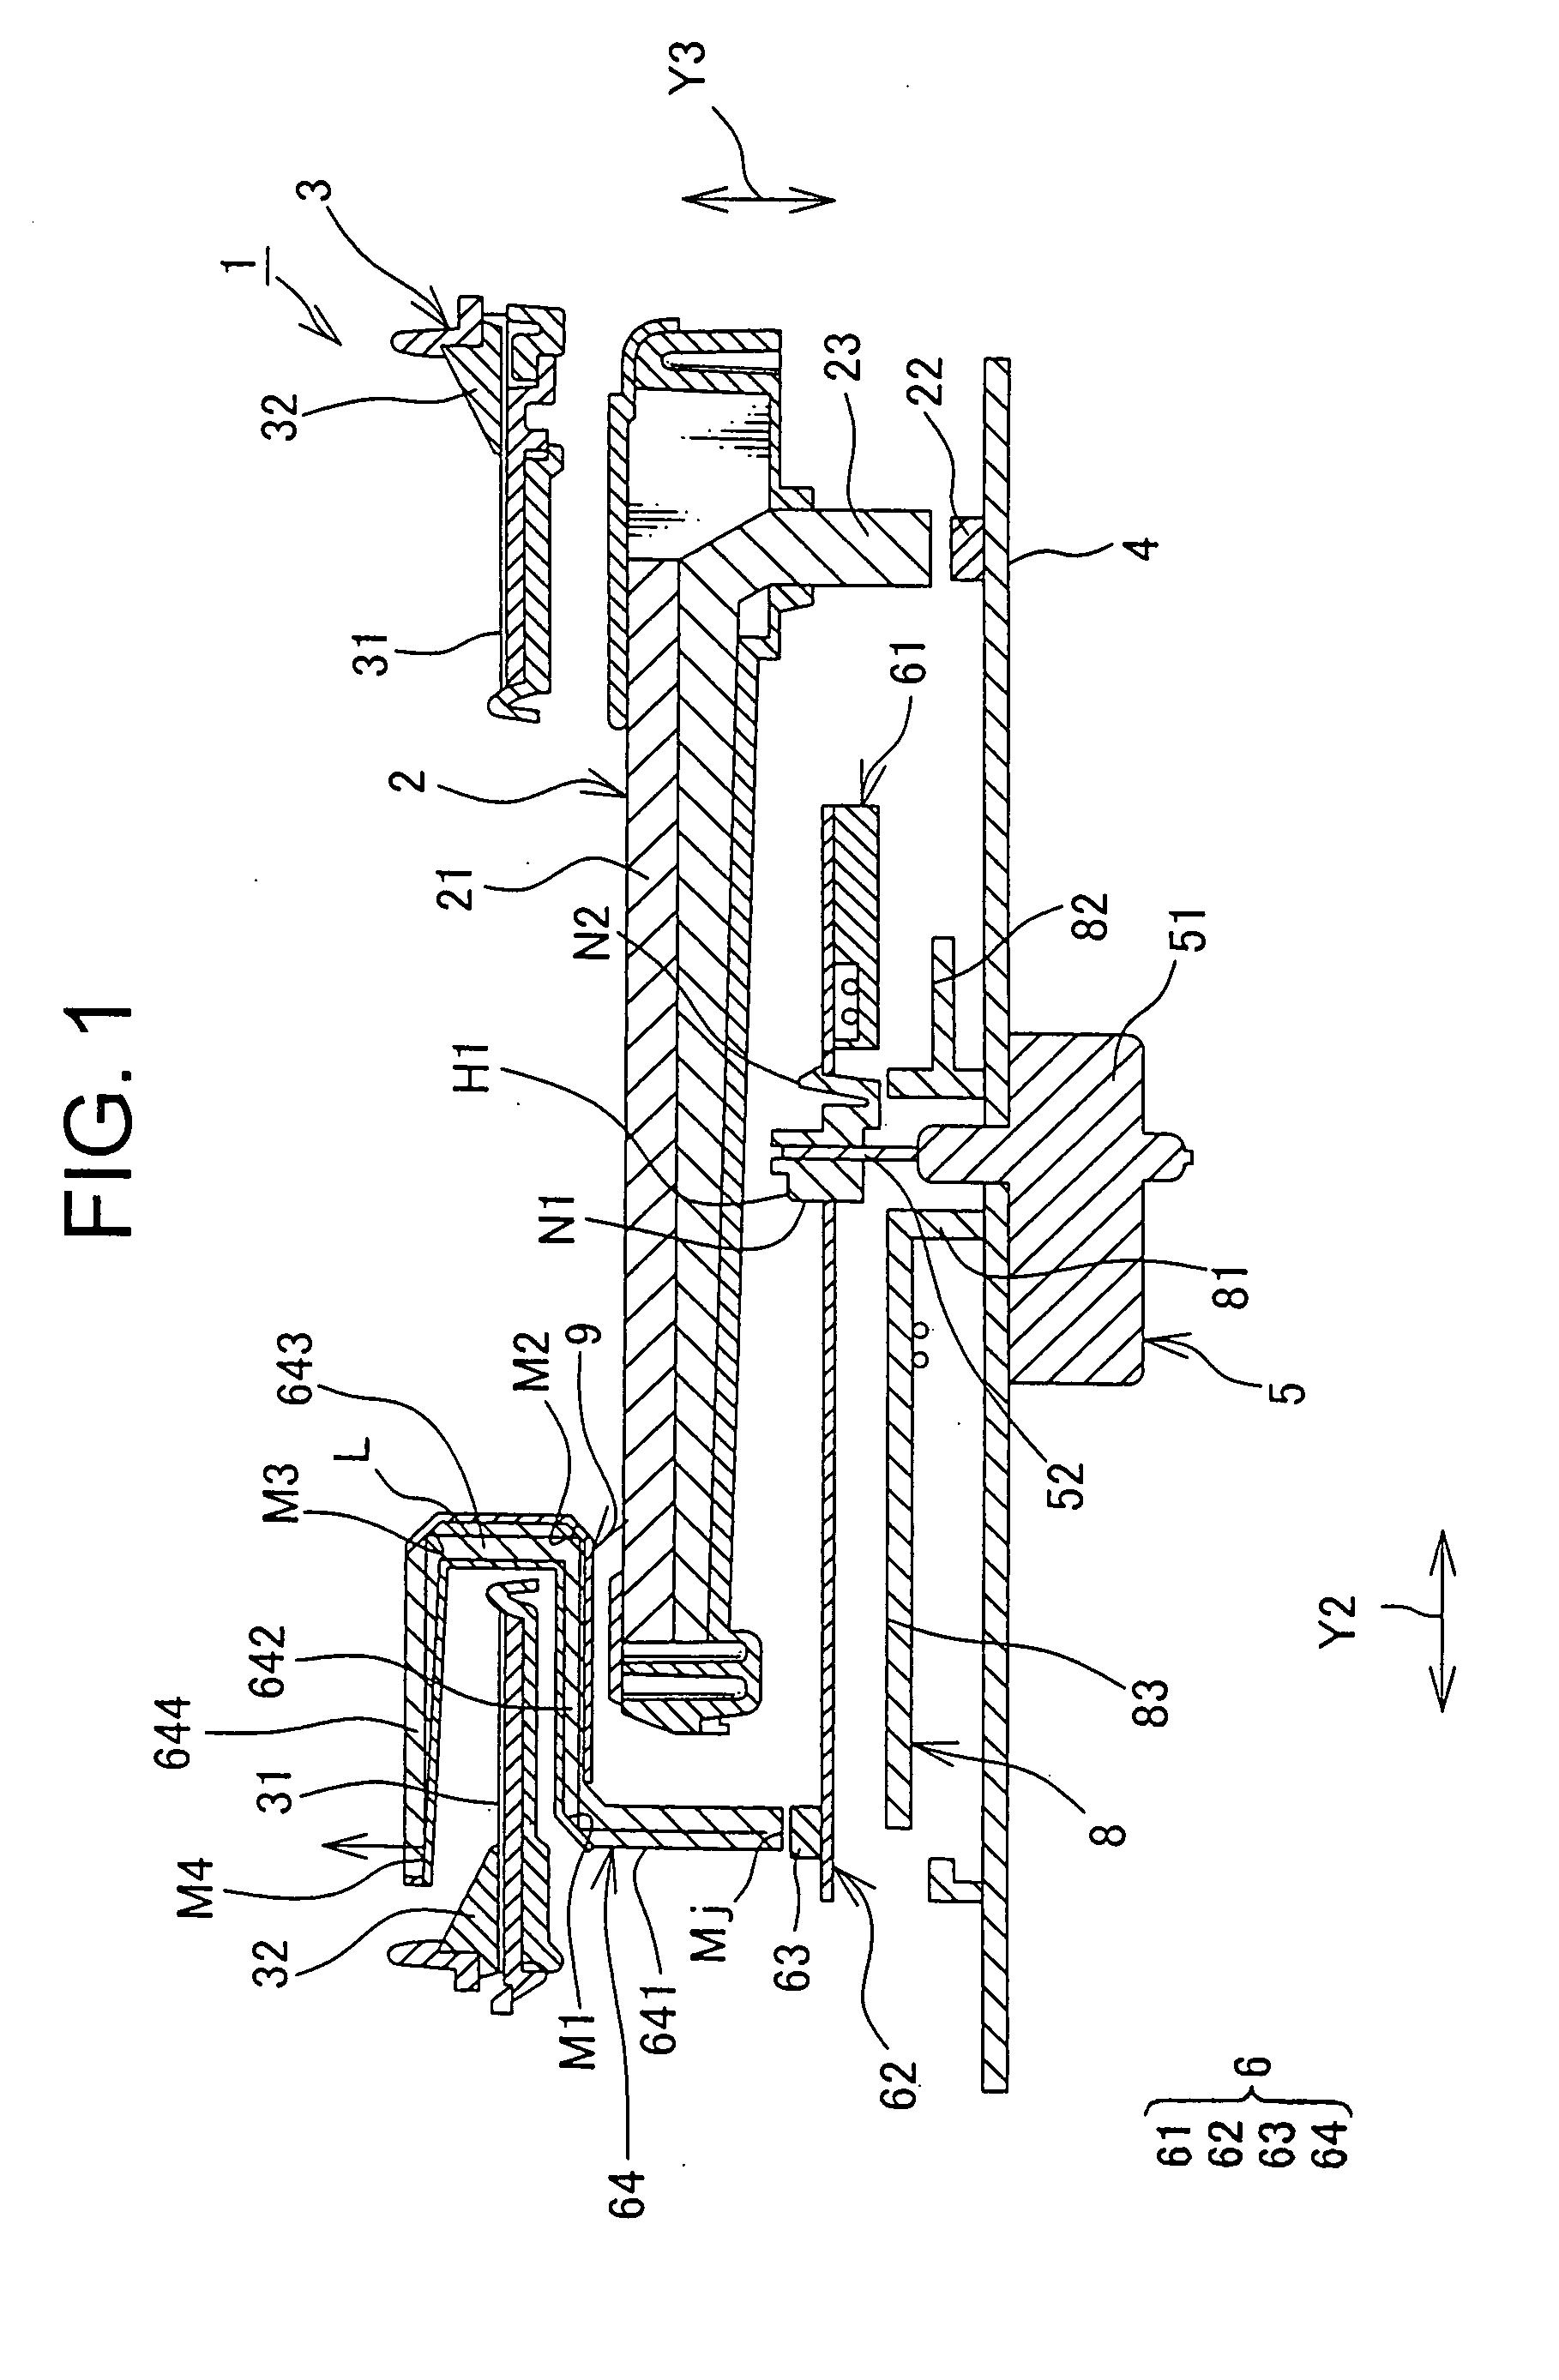 Display unit having a dial and a central display